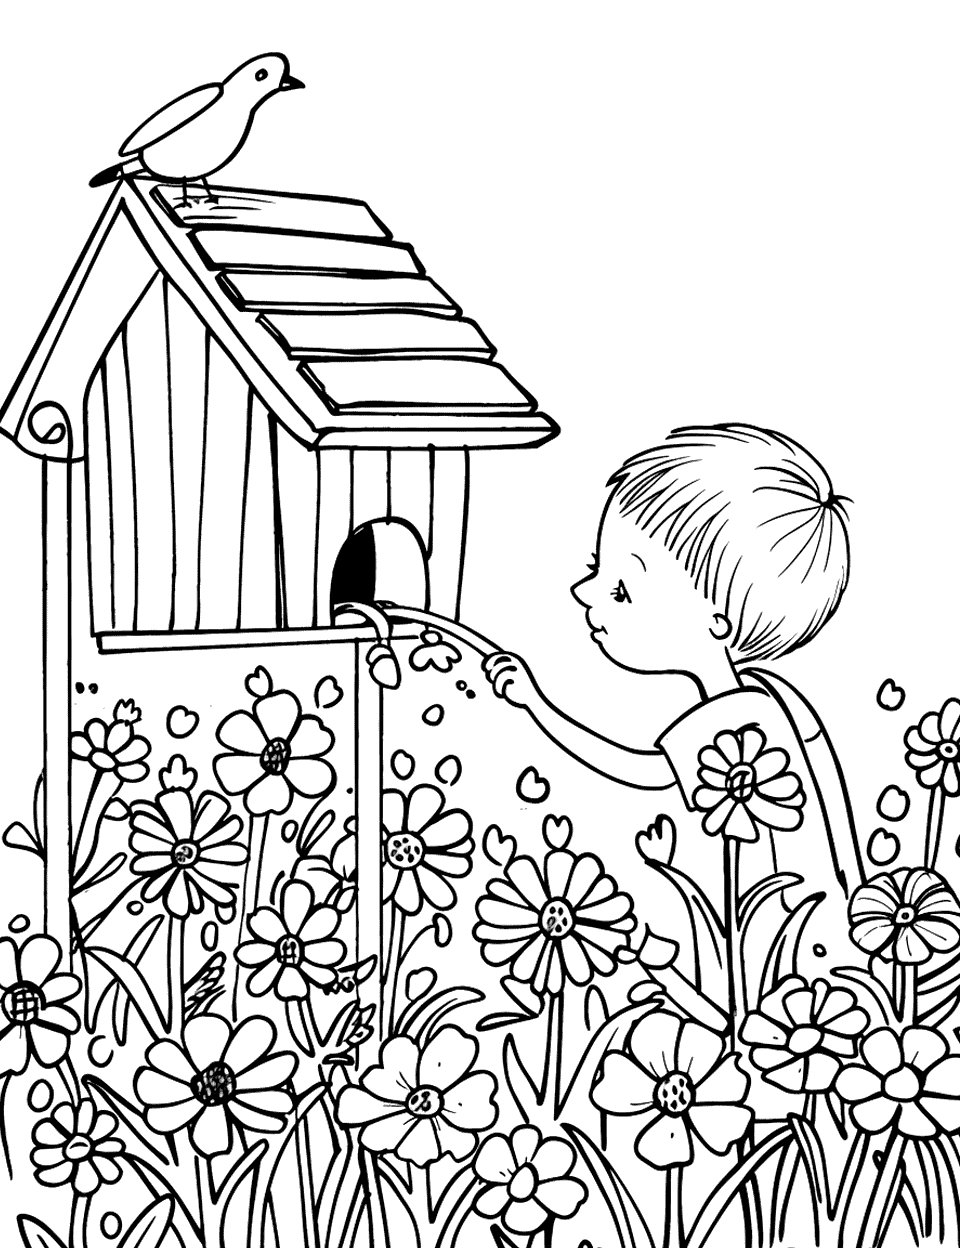 Building a Birdhouse Garden Coloring Page - A child building a birdhouse in a spring garden with blooming flowers.